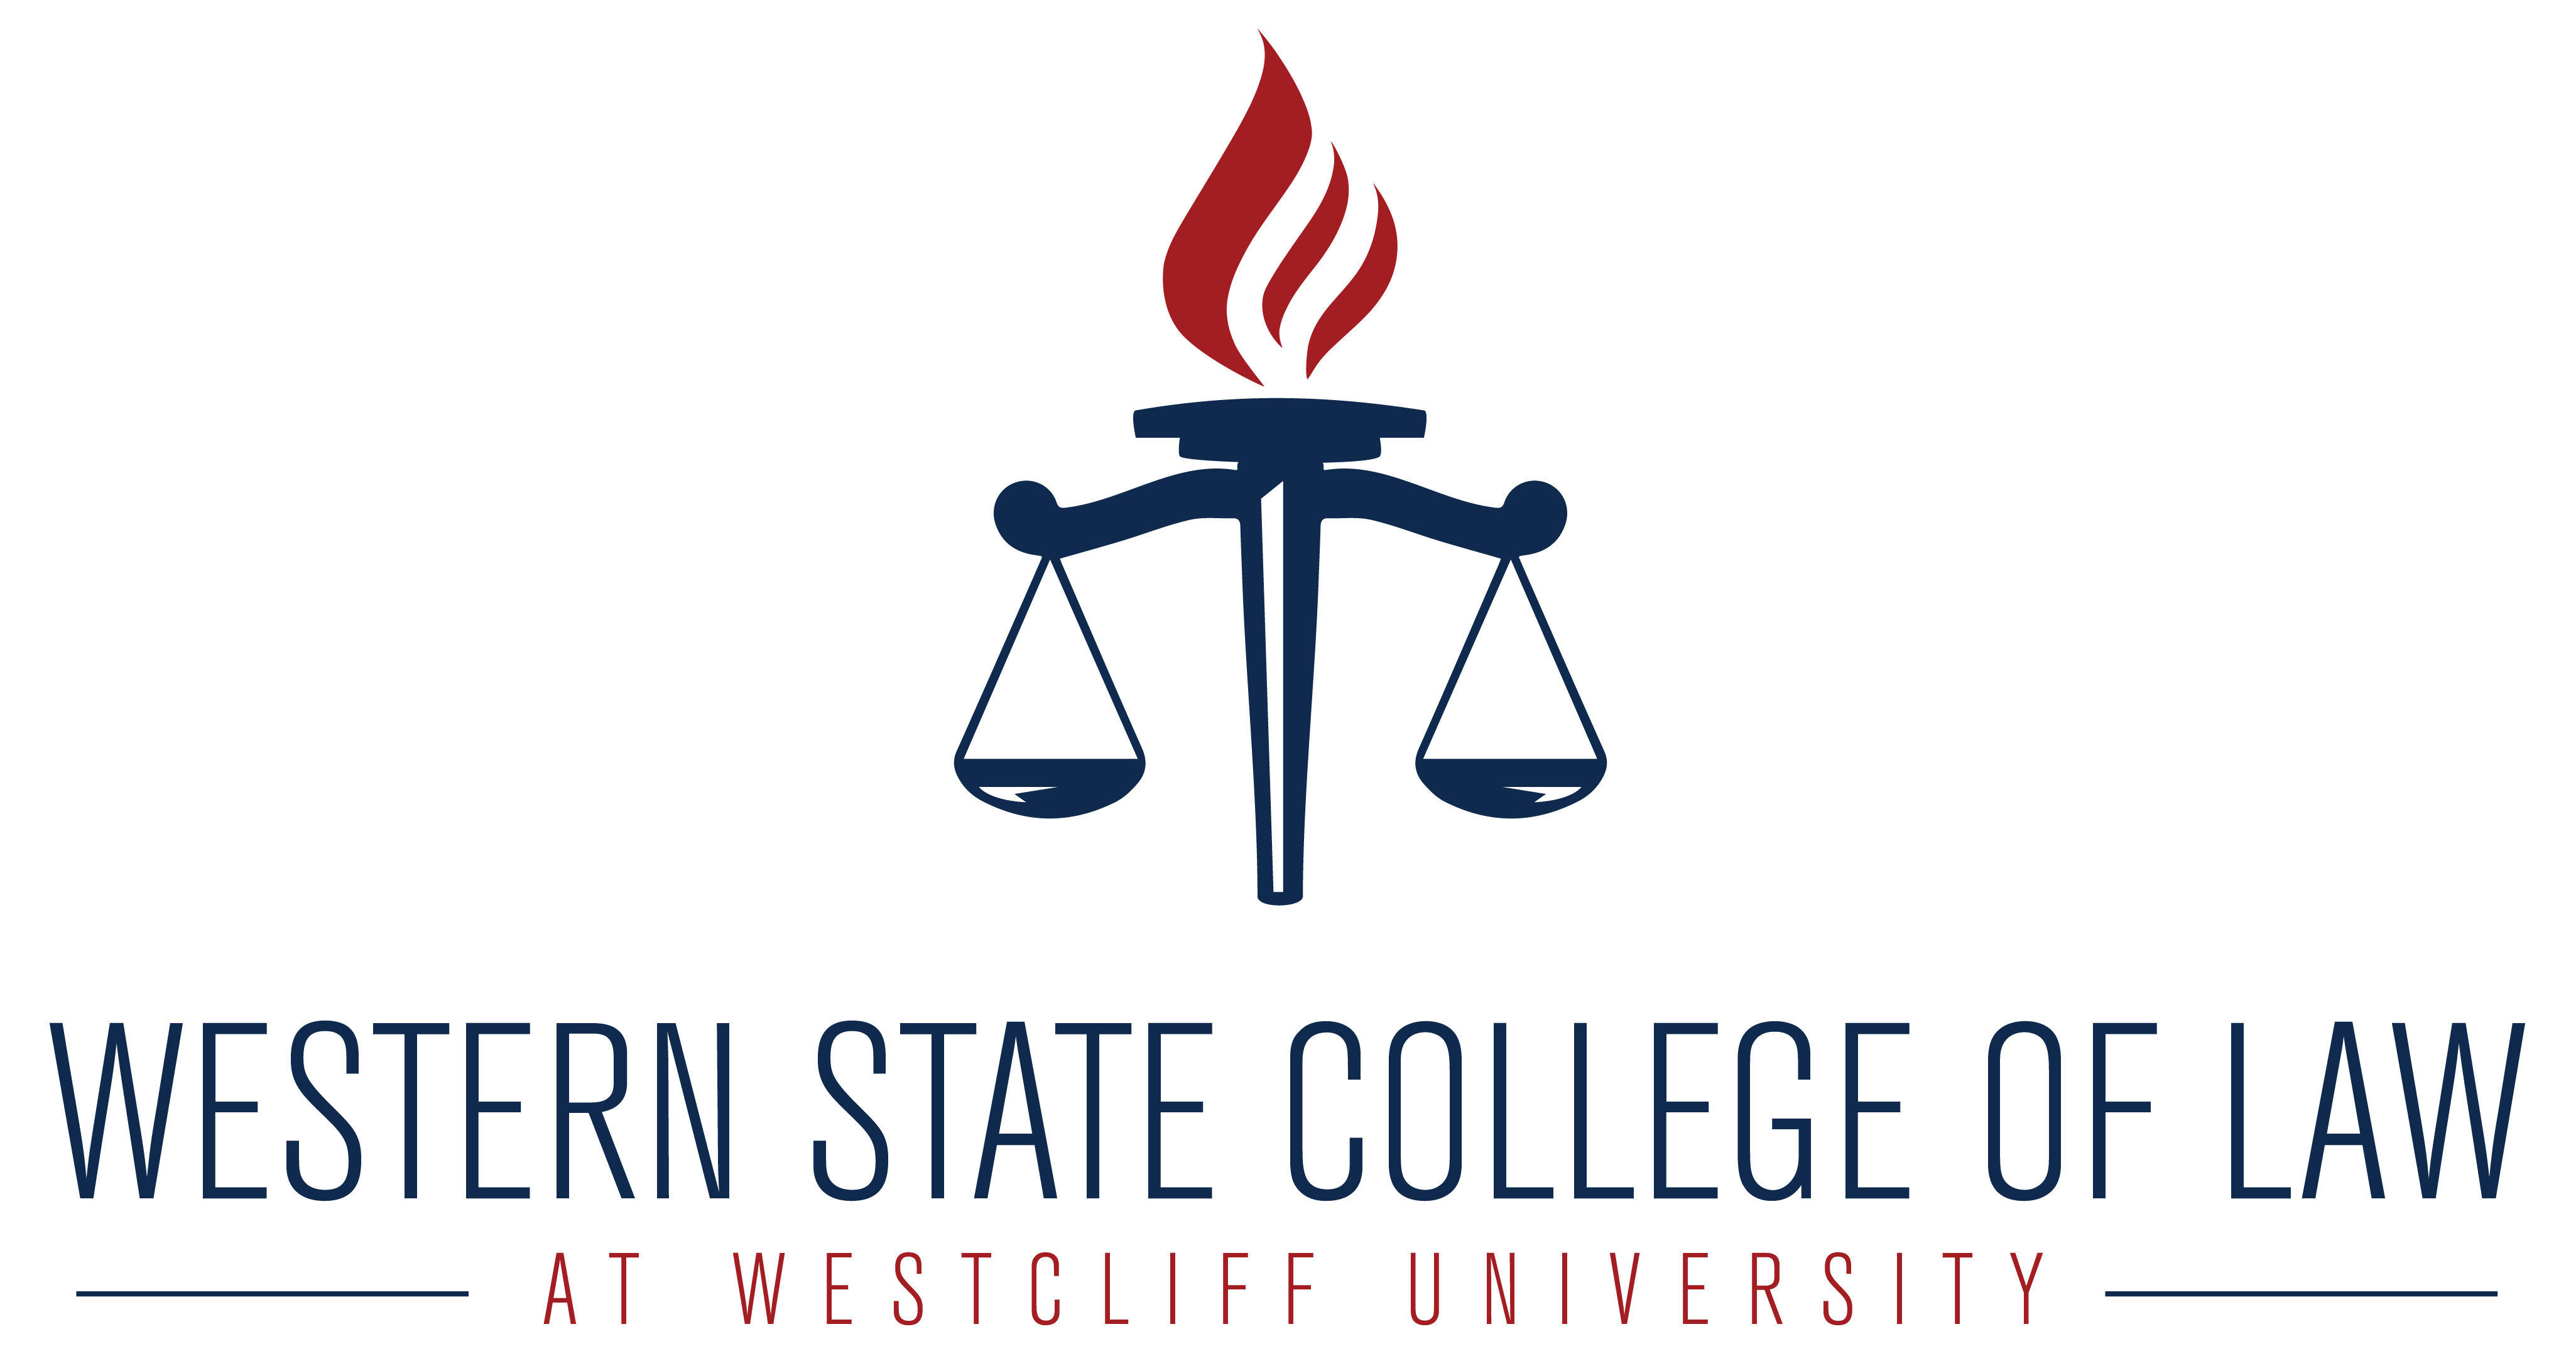 Western State College of Law at Westcliff University